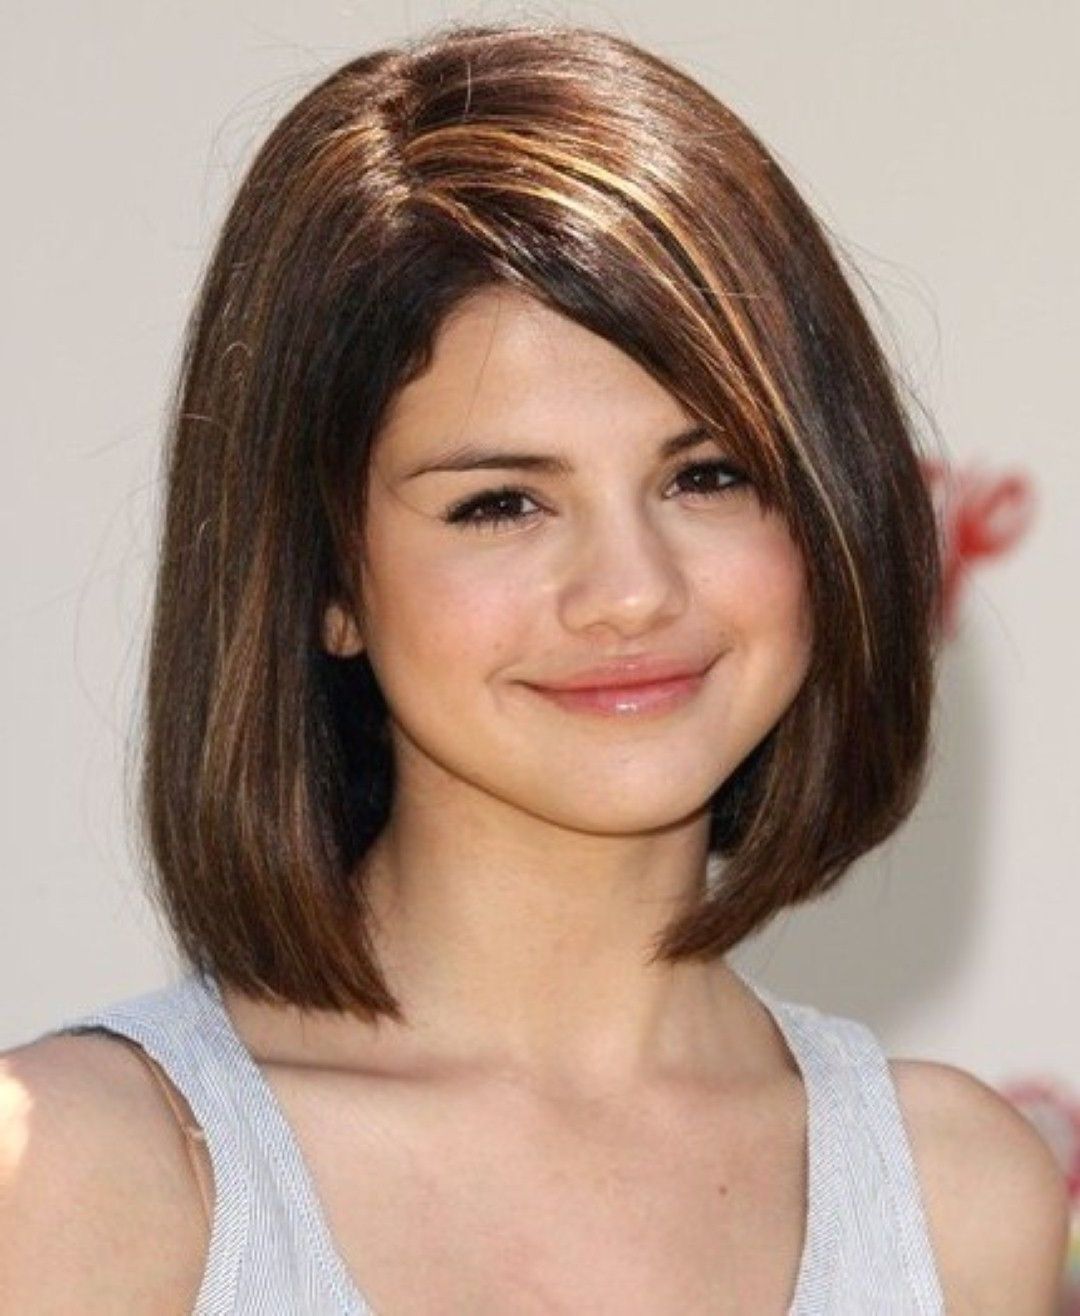 Girls Hairstyles Ideas To Try This Year | The Bobs | Pinterest Inside Short Hairstyles For Young Girls (Photo 4 of 25)